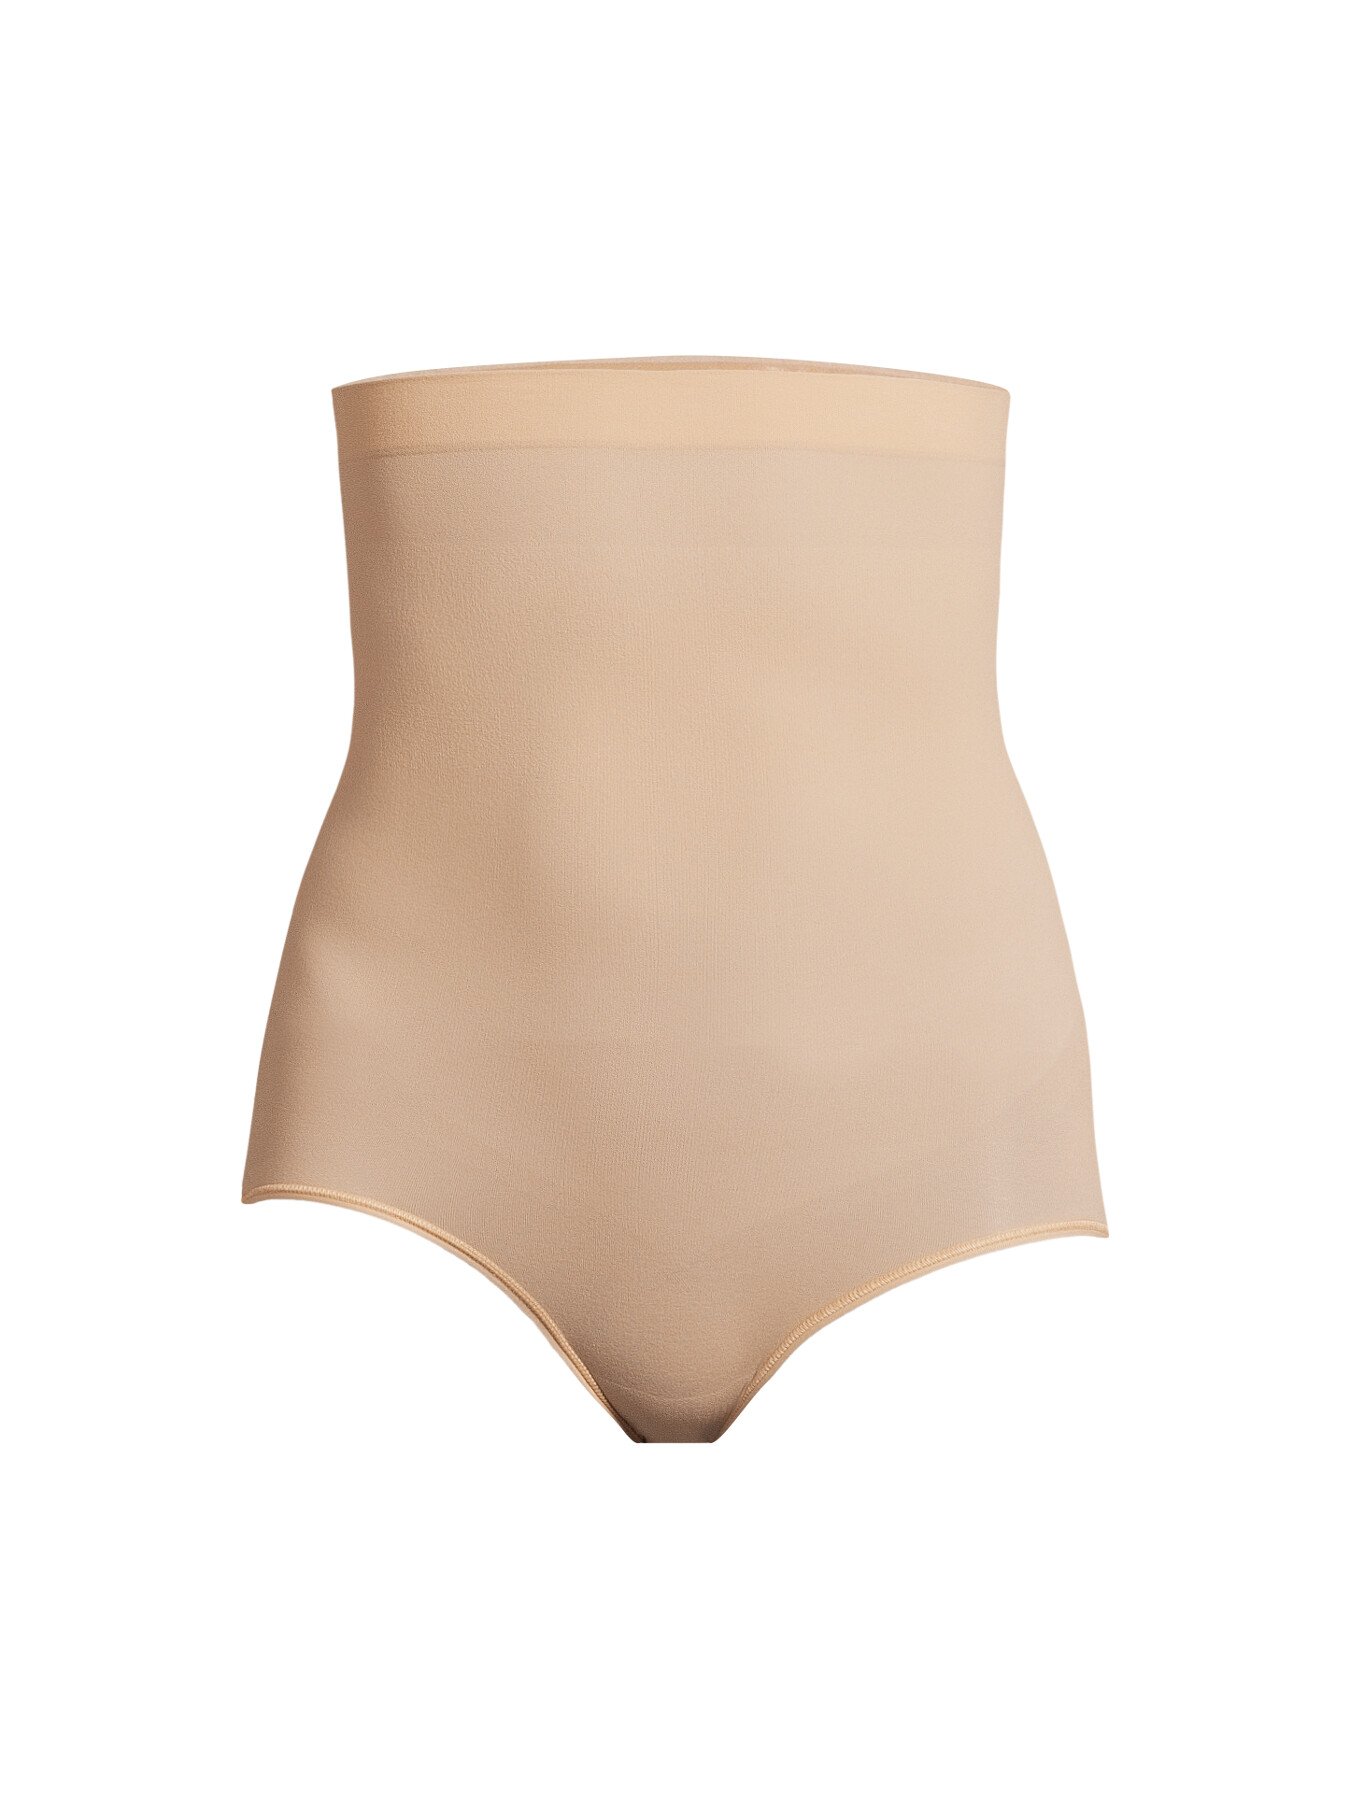 Spanx Women's Everyday Shaping High Waisted Brief Nude